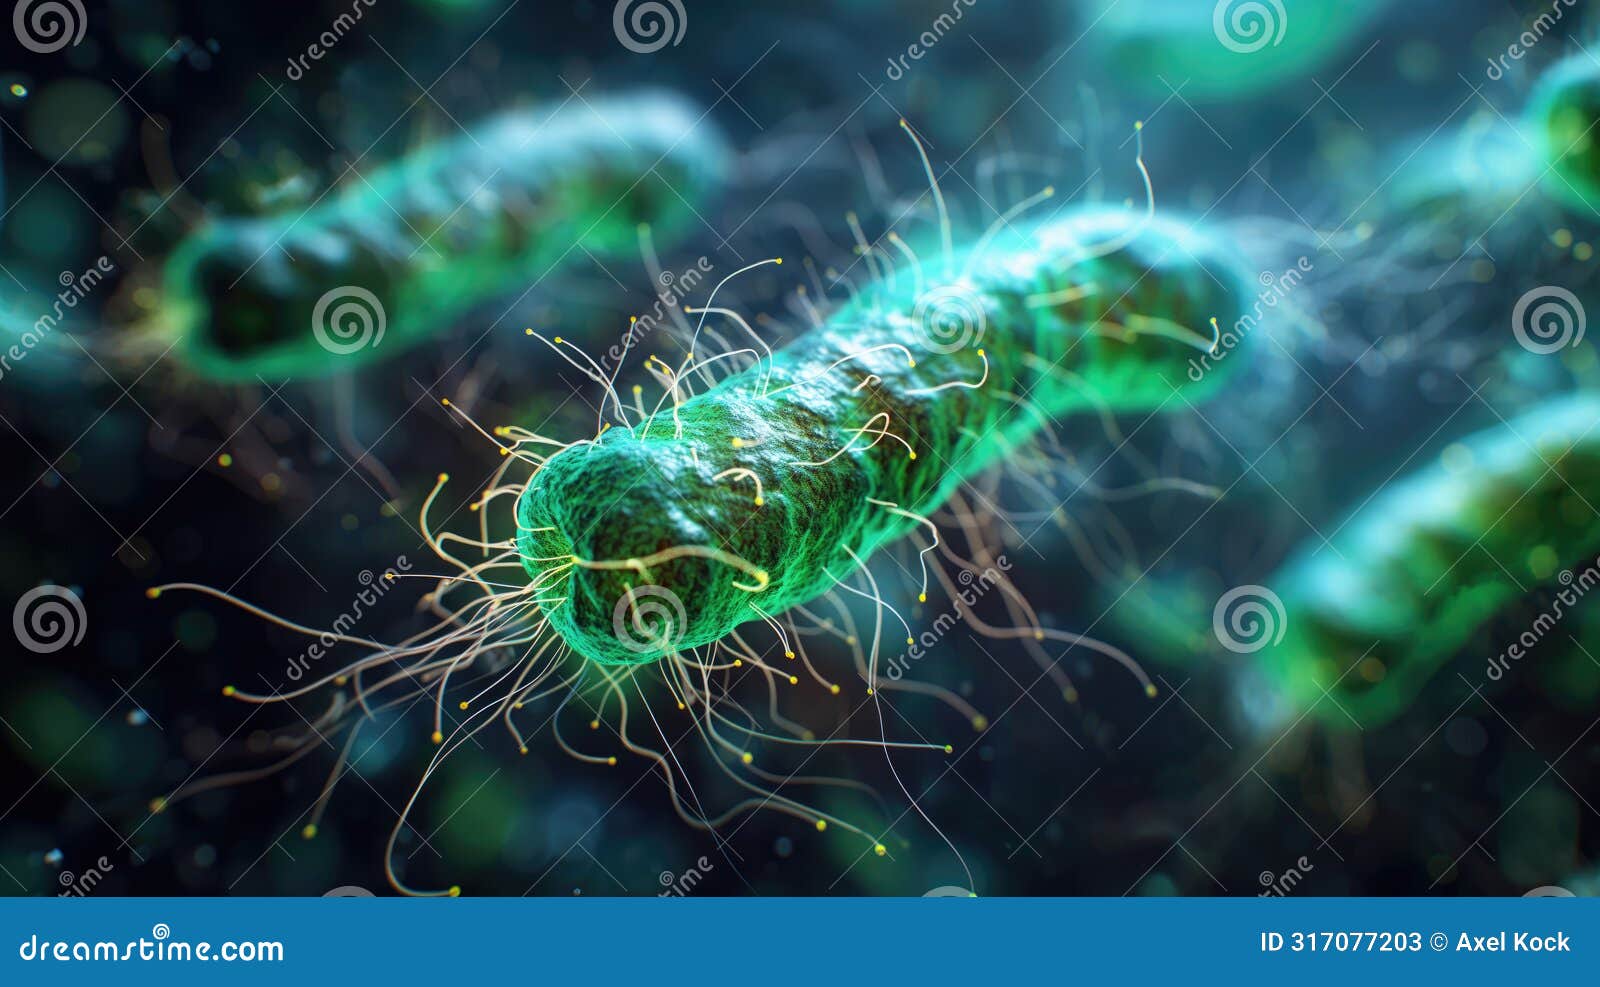 helicobacter pylori. a bacteria causing stomach infections, linked to ulcers and gastritis. 